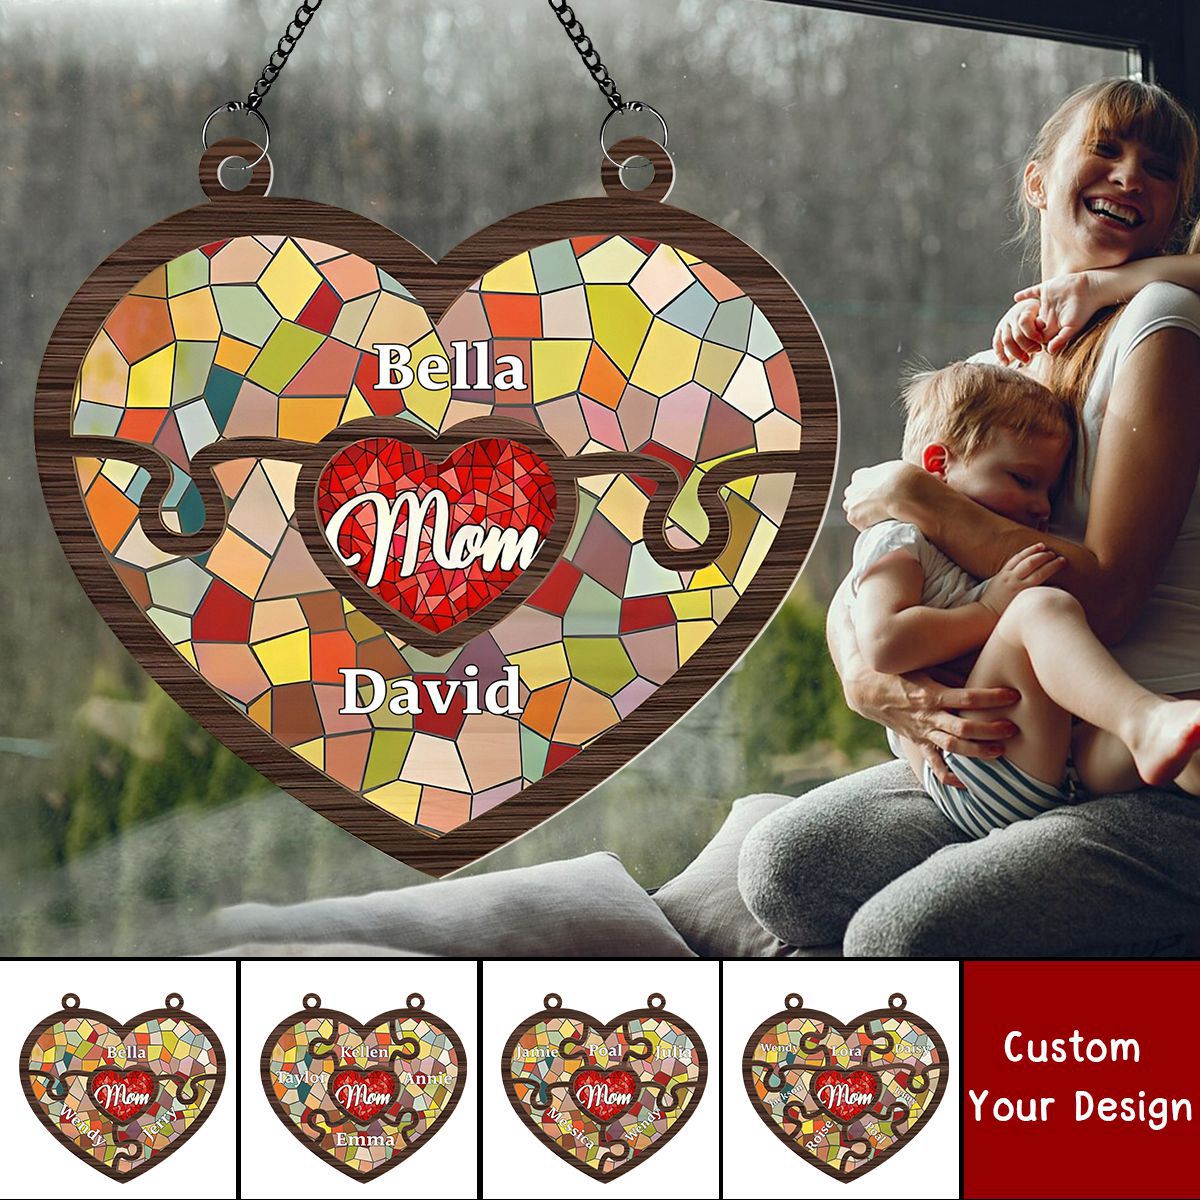 Mom Holds Us All - Personalized Window Hanging Suncatcher Ornament